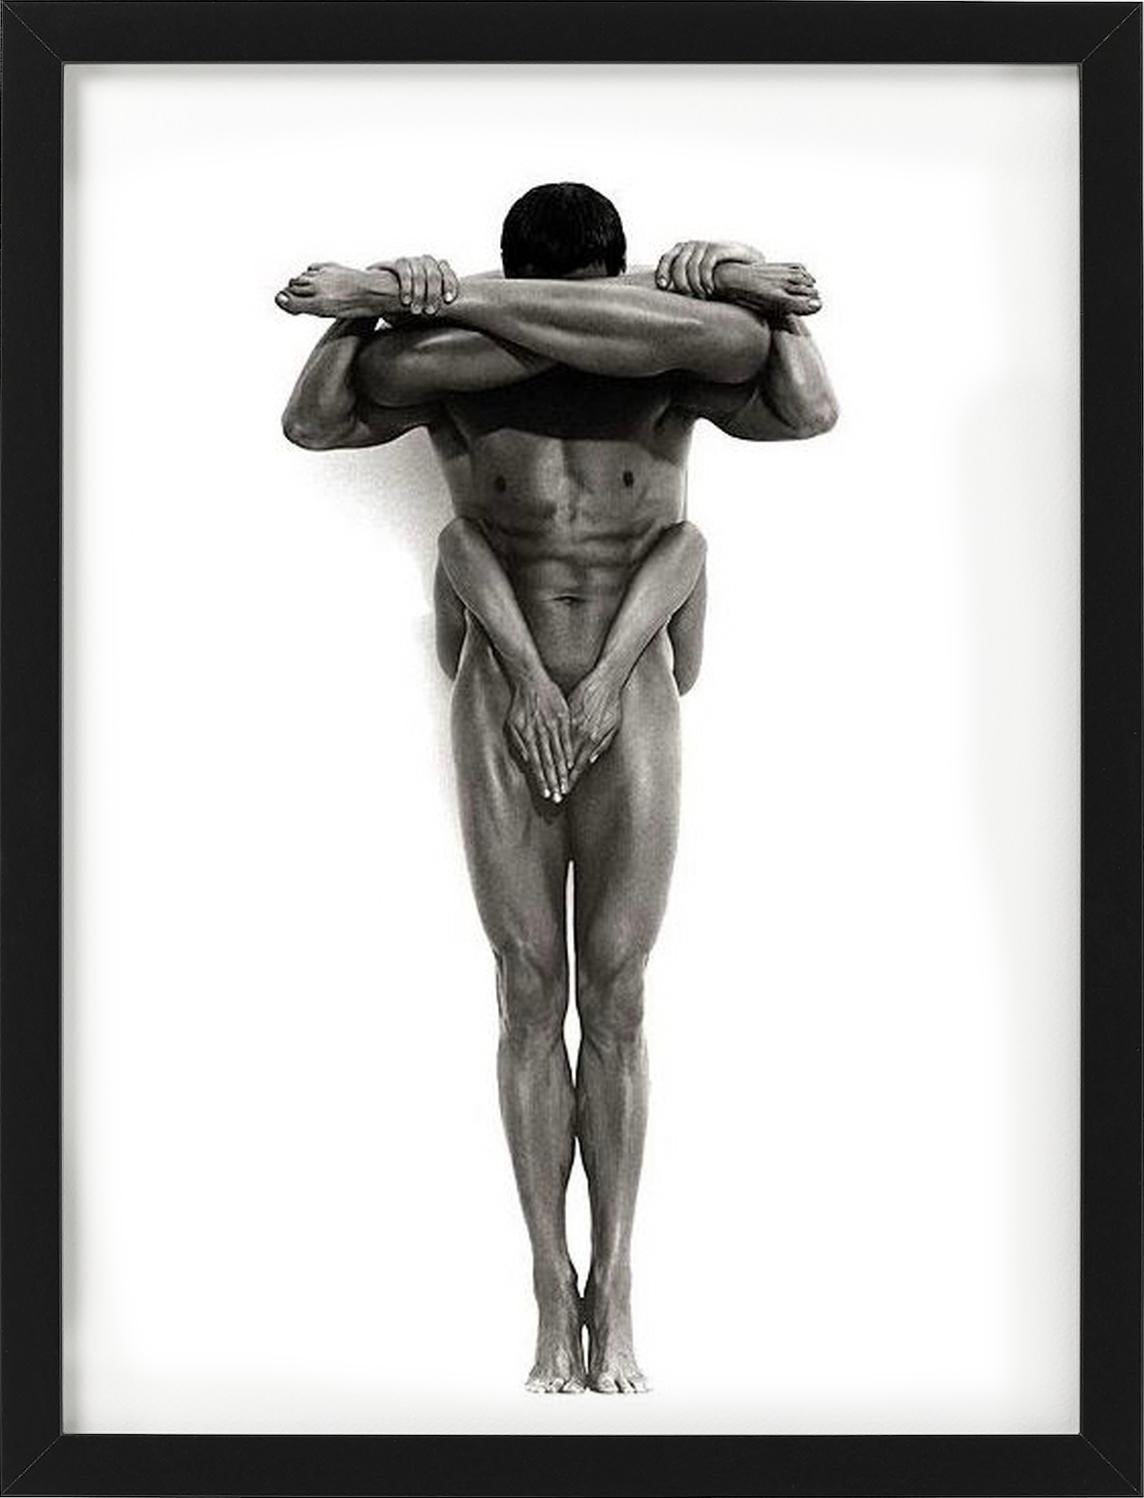 Yvonne & Tom #66 - sculptural nude of man and women, fine art photography, 1994 - Photograph by Andreas H. Bitesnich